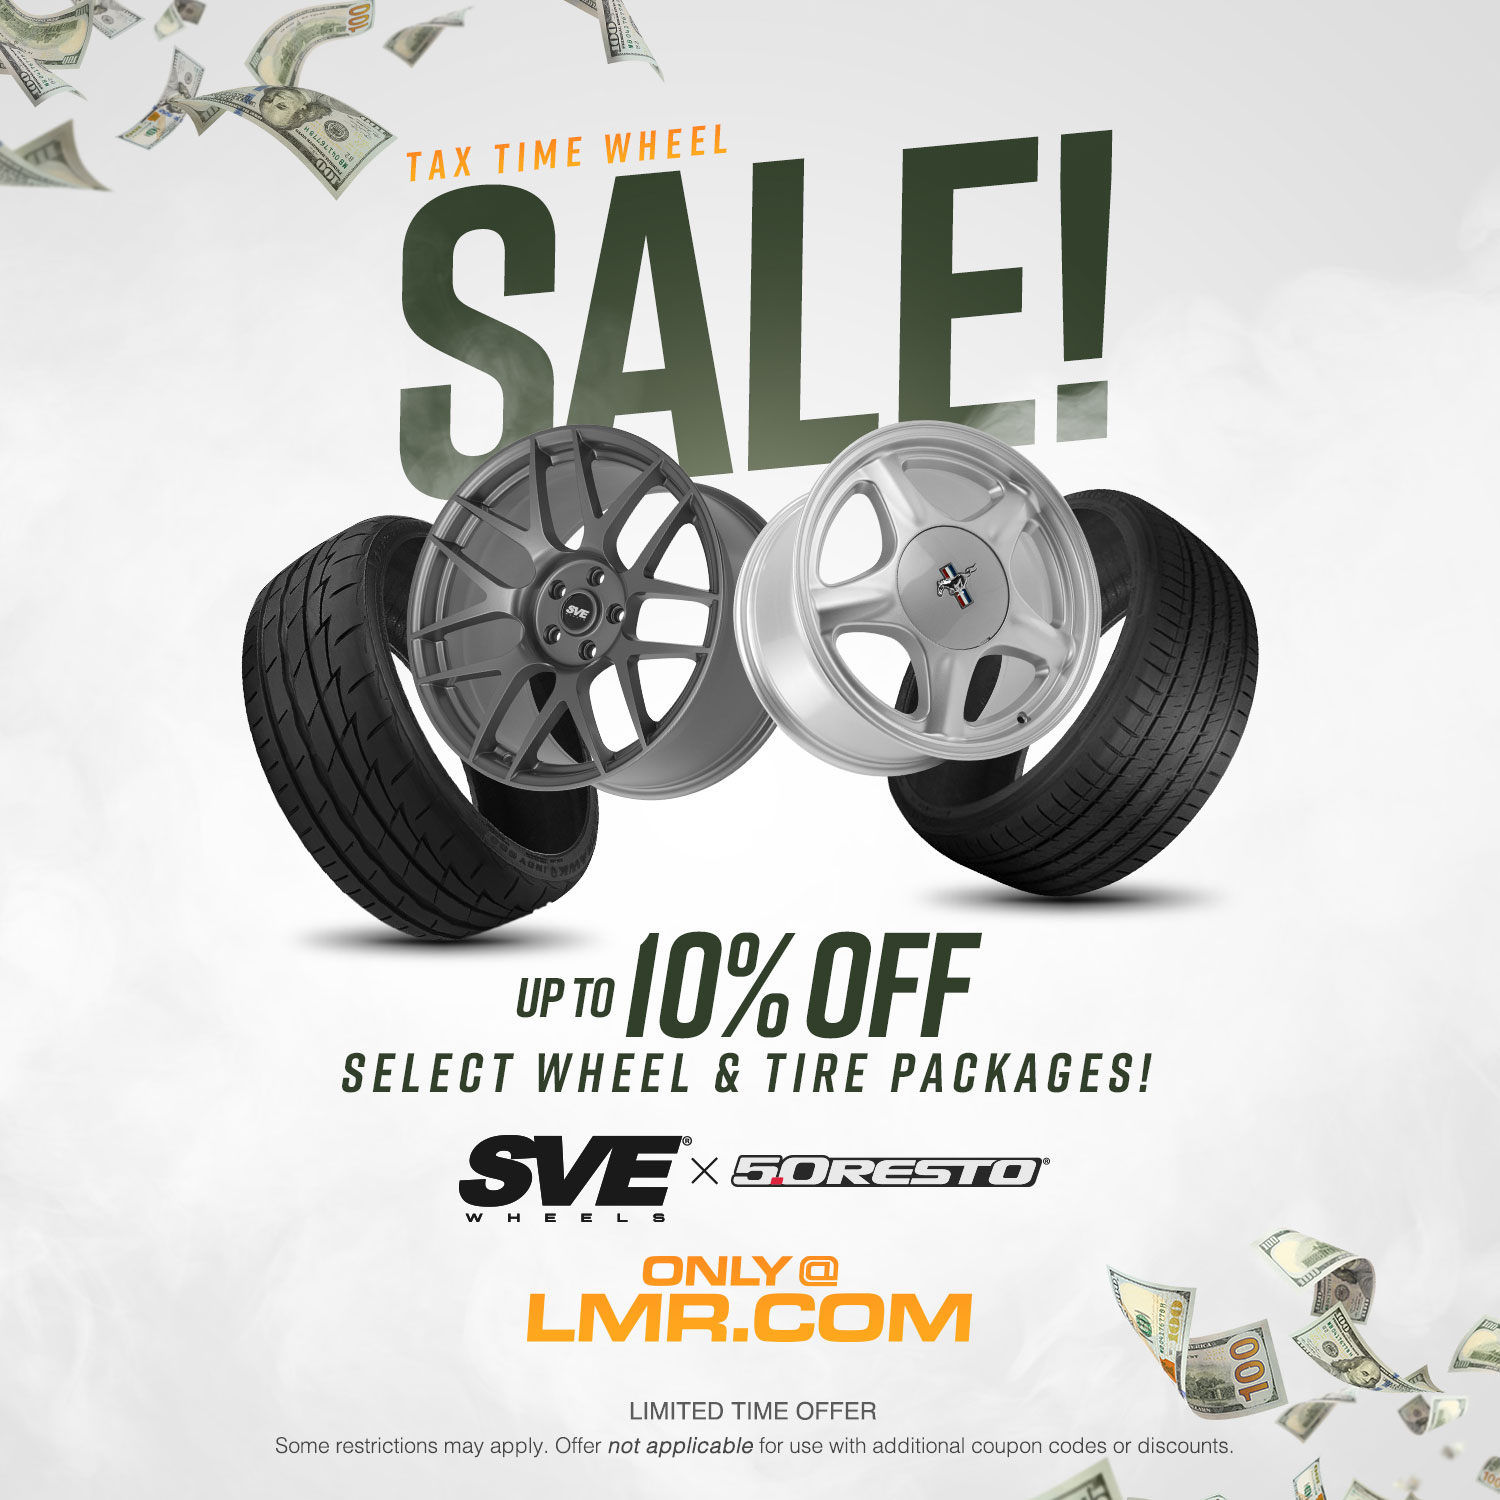 Tax Time Wheel Sale - Up to 10% OFF Select Styles!